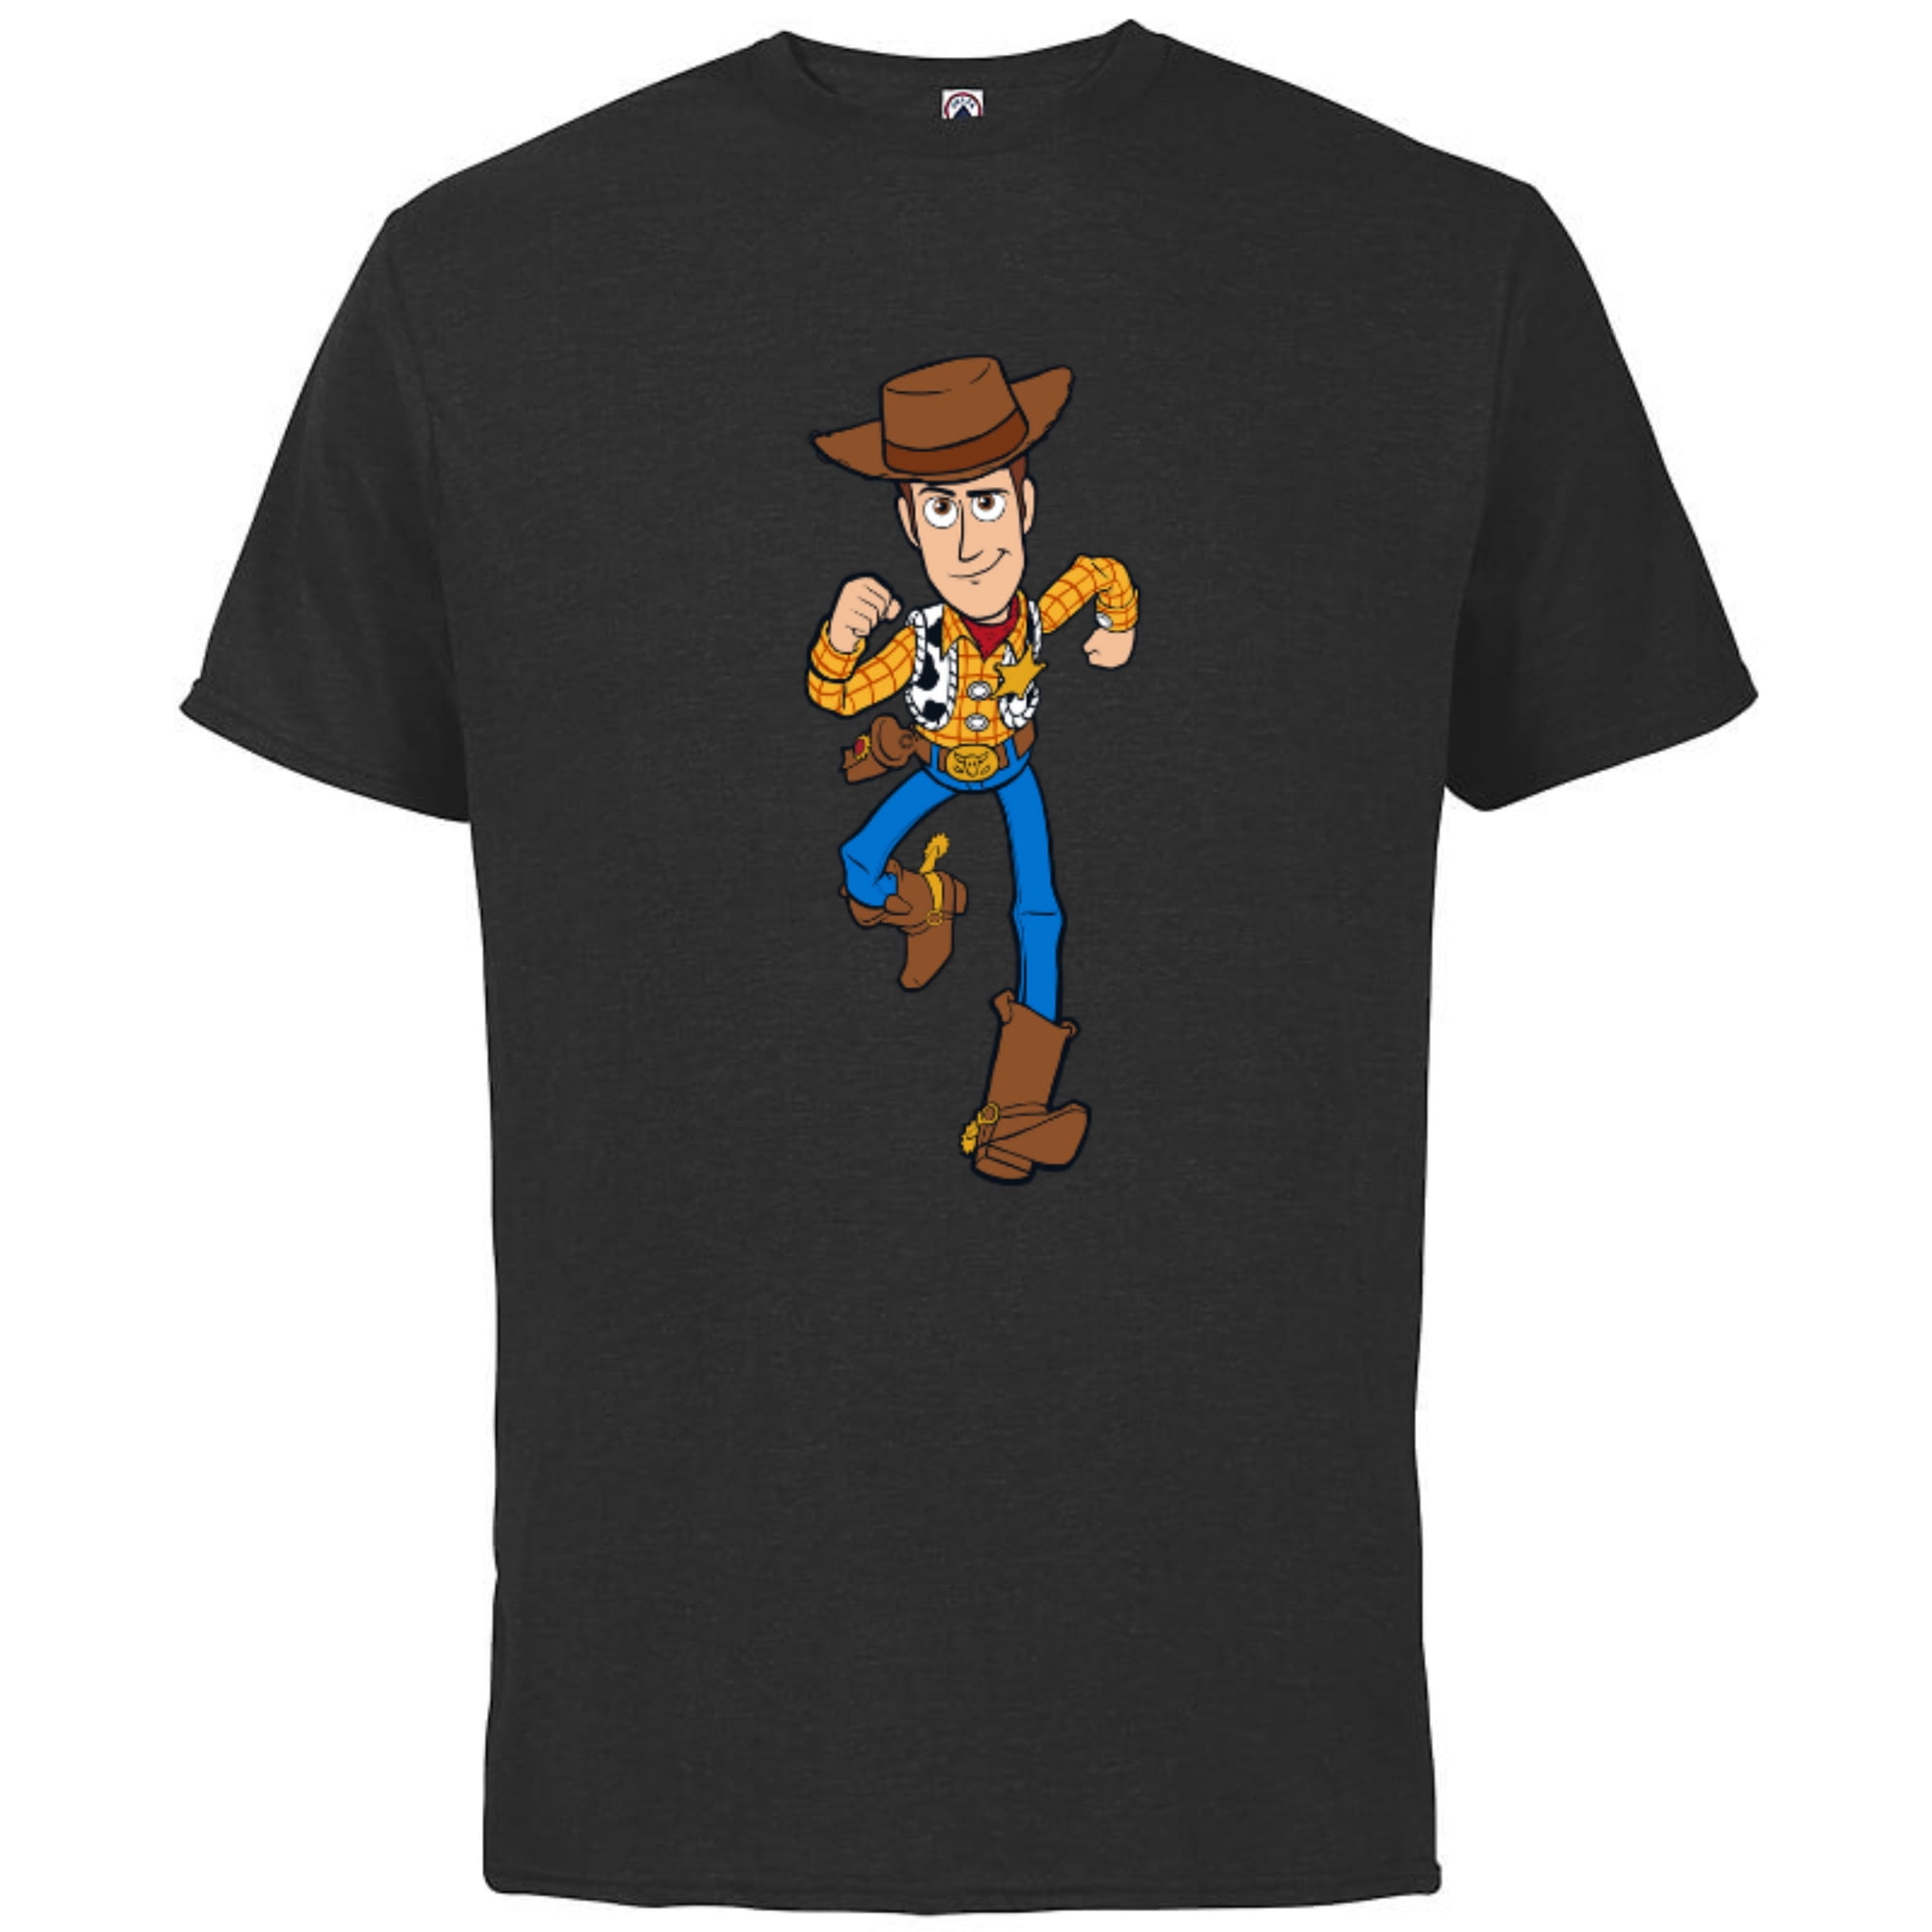 Disney Pixar Toy Story 4 Woody on the Run T-Shirt - Short Sleeve Cotton T- Shirt for Adults - Customized-Athletic Navy 